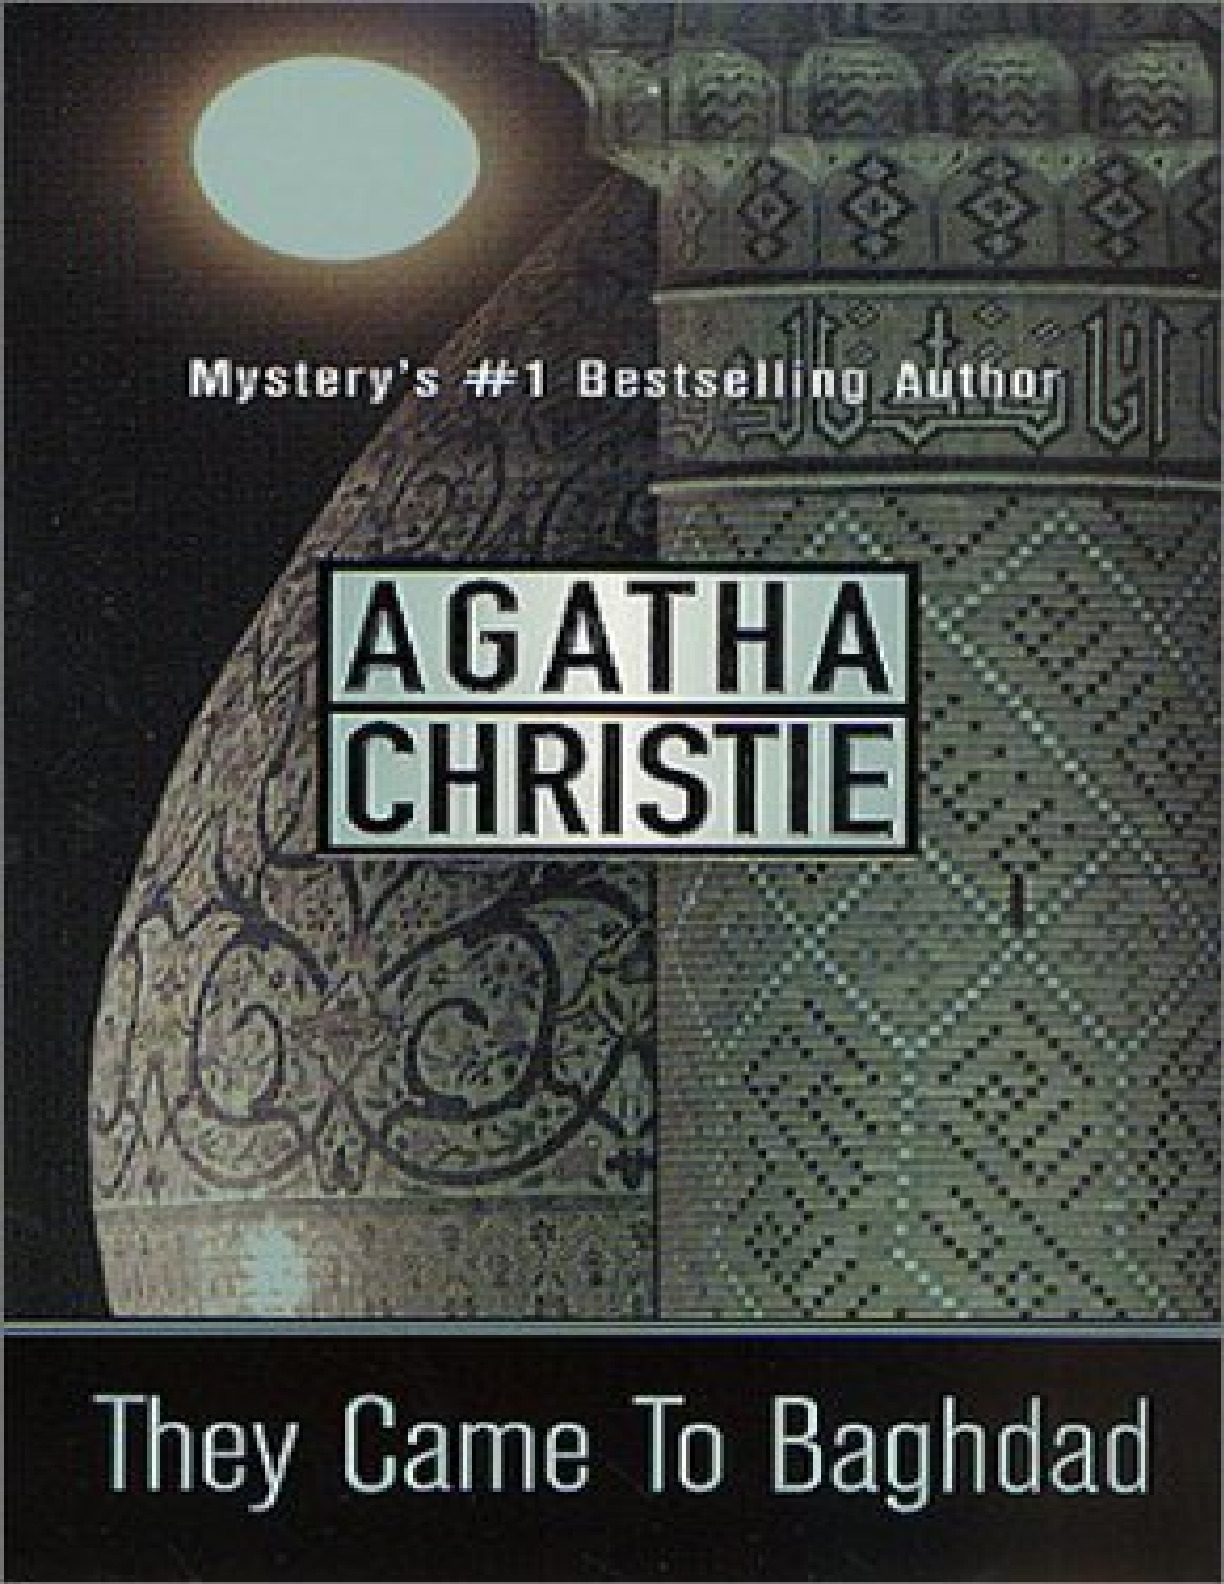 They came to Baghdad – Agatha Christie